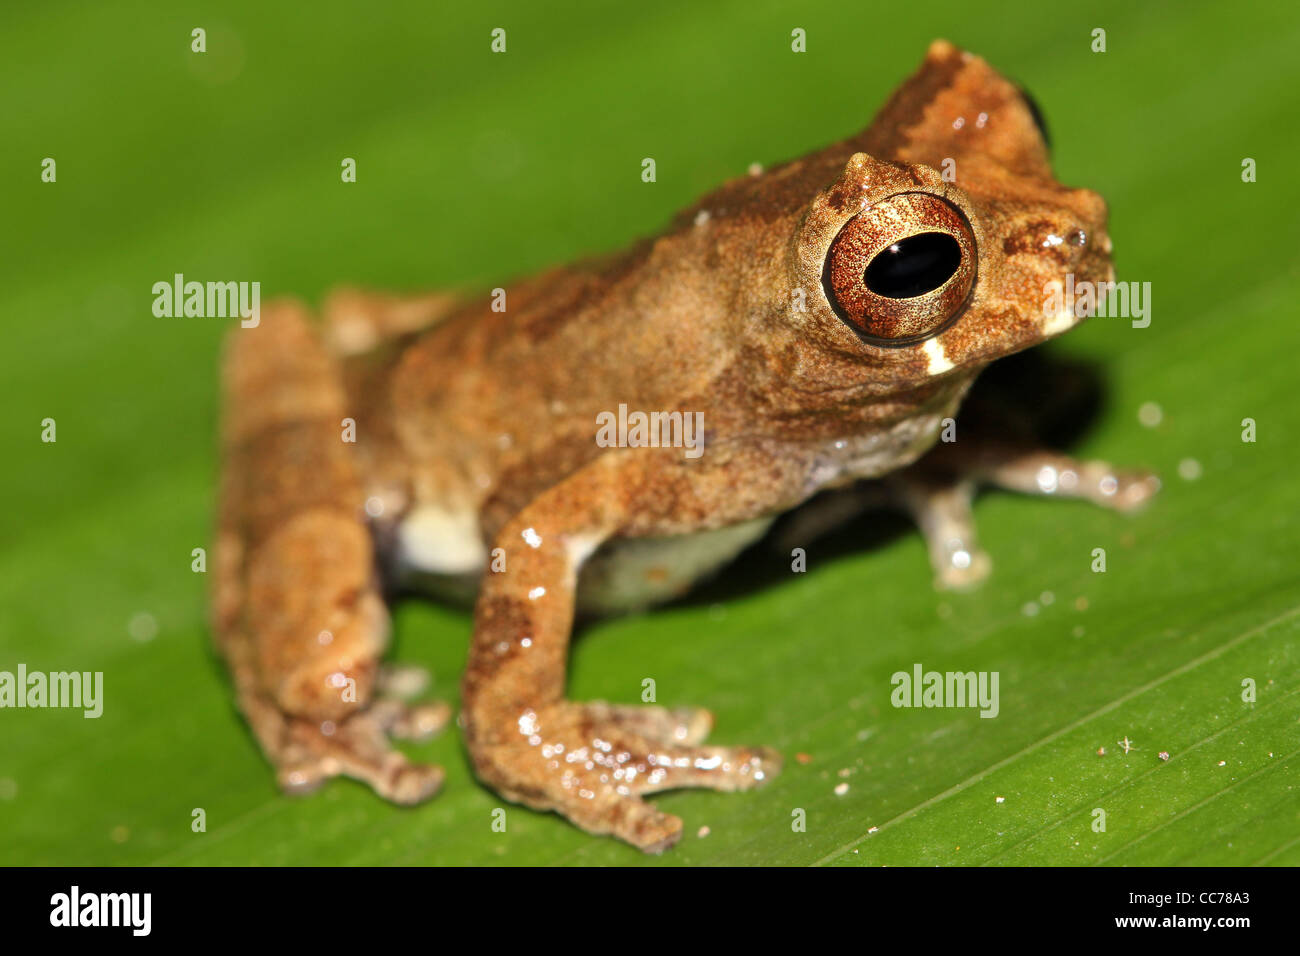 A cute Short-headed Treefrog (Dendropsophus parviceps) in the Stock Photo -  Alamy